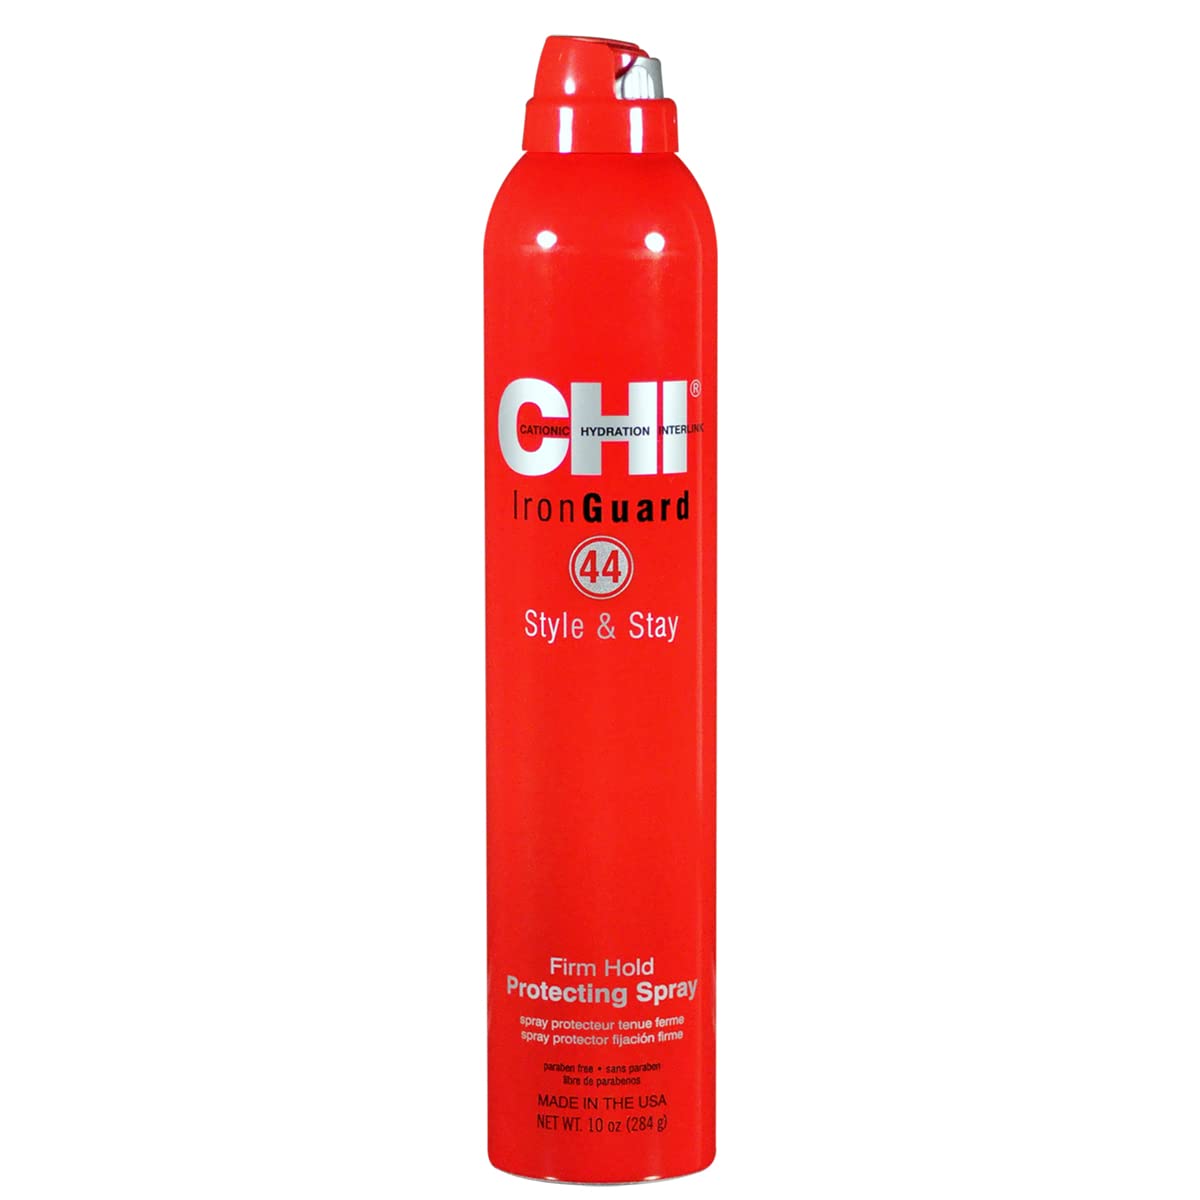 CHI 44 Iron Guard Style & Stay Firm Hold Protecting [...]